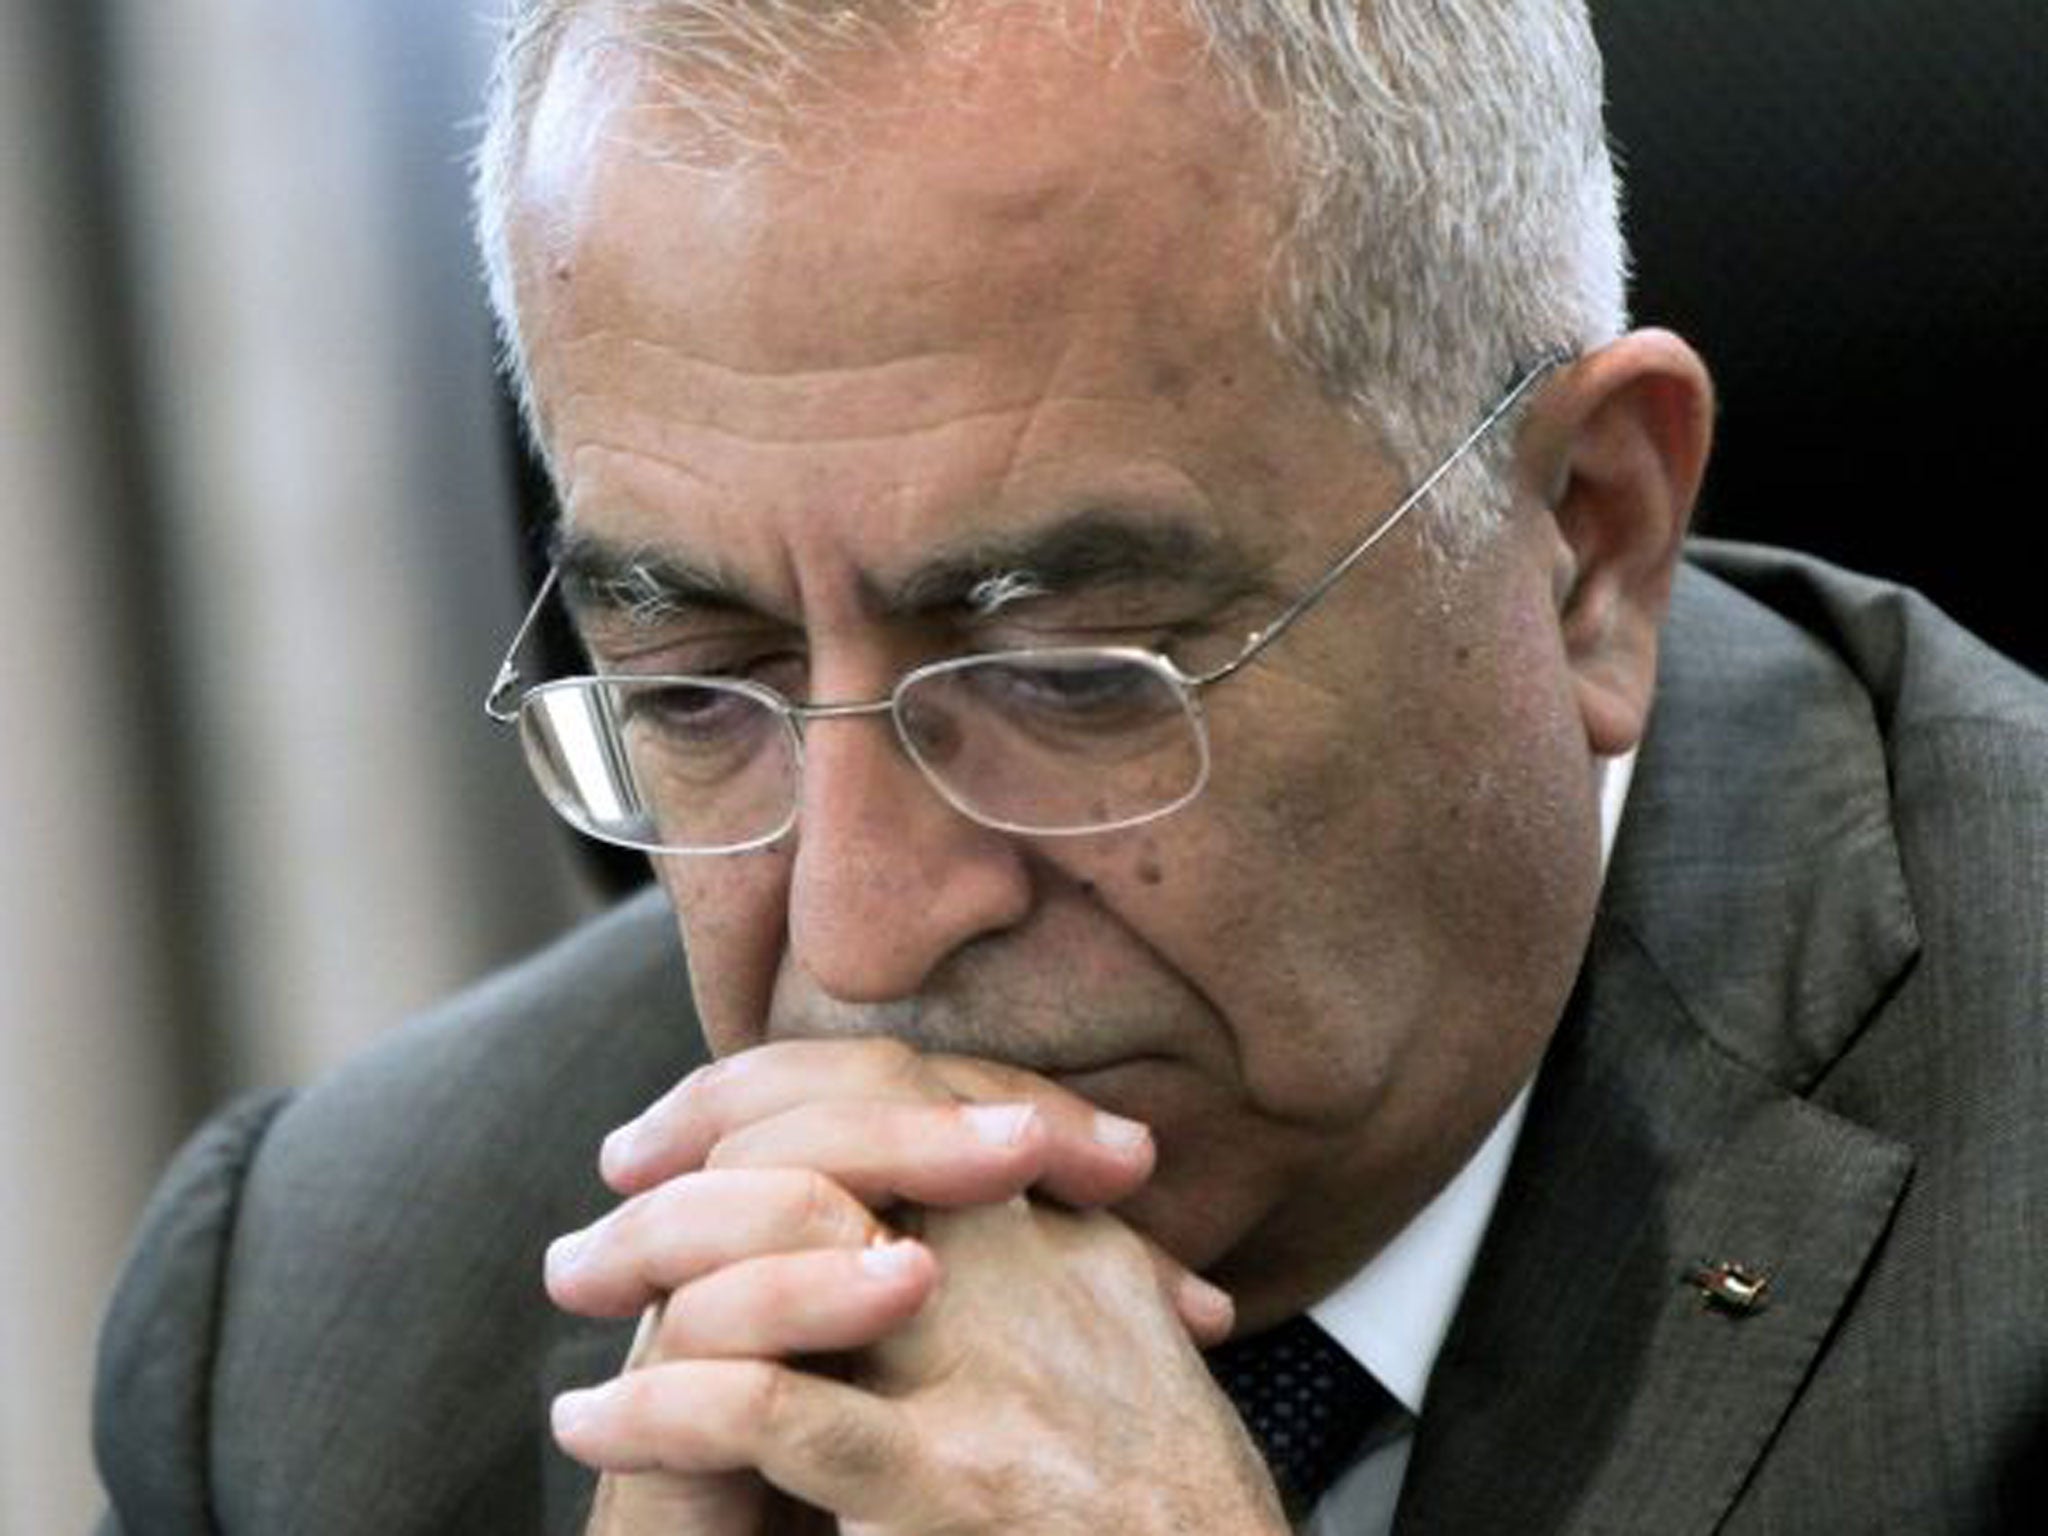 Salam Fayyad was highly regarded by the West